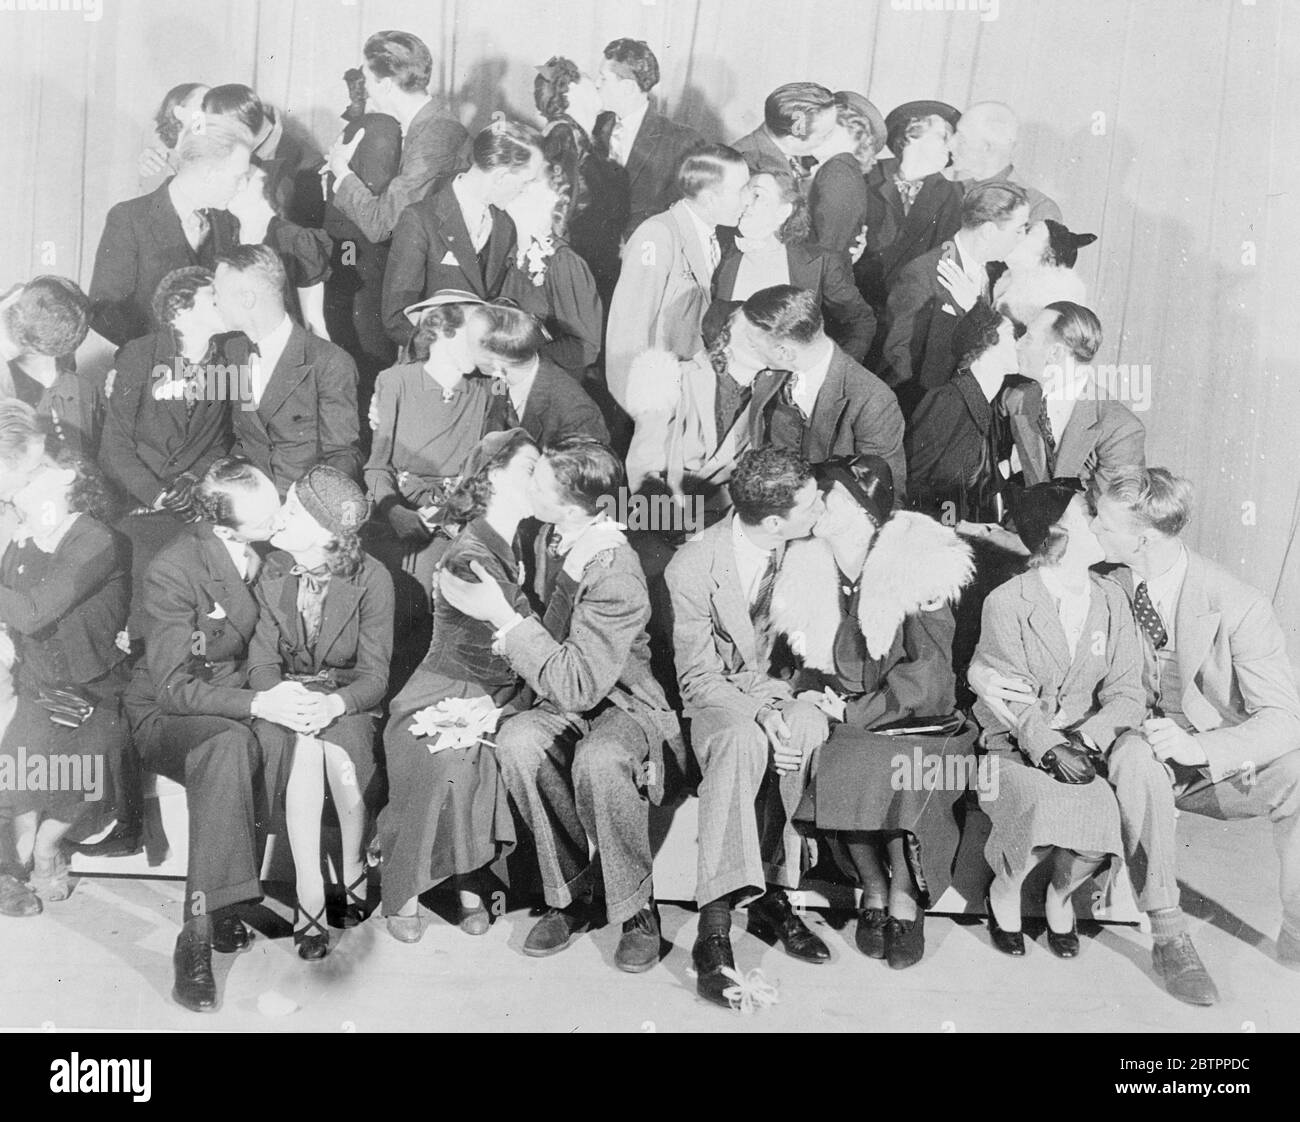 Kissing time!. In connection with a new radio play 'First Love', Rosalind Russell and James Stewart, the film actors, selected 100 engaged couples to attend the broadcast at the Los Angeles radio station. The couples were selected from the 'marriage'columns of Los Angeles newspapers. Photo shows, Rosalind Russell and James Stewart (centre, first row) gives some first-hand instruction in the proper close-up technique for an embrace, at the Los Angeles studio. Stock Photo